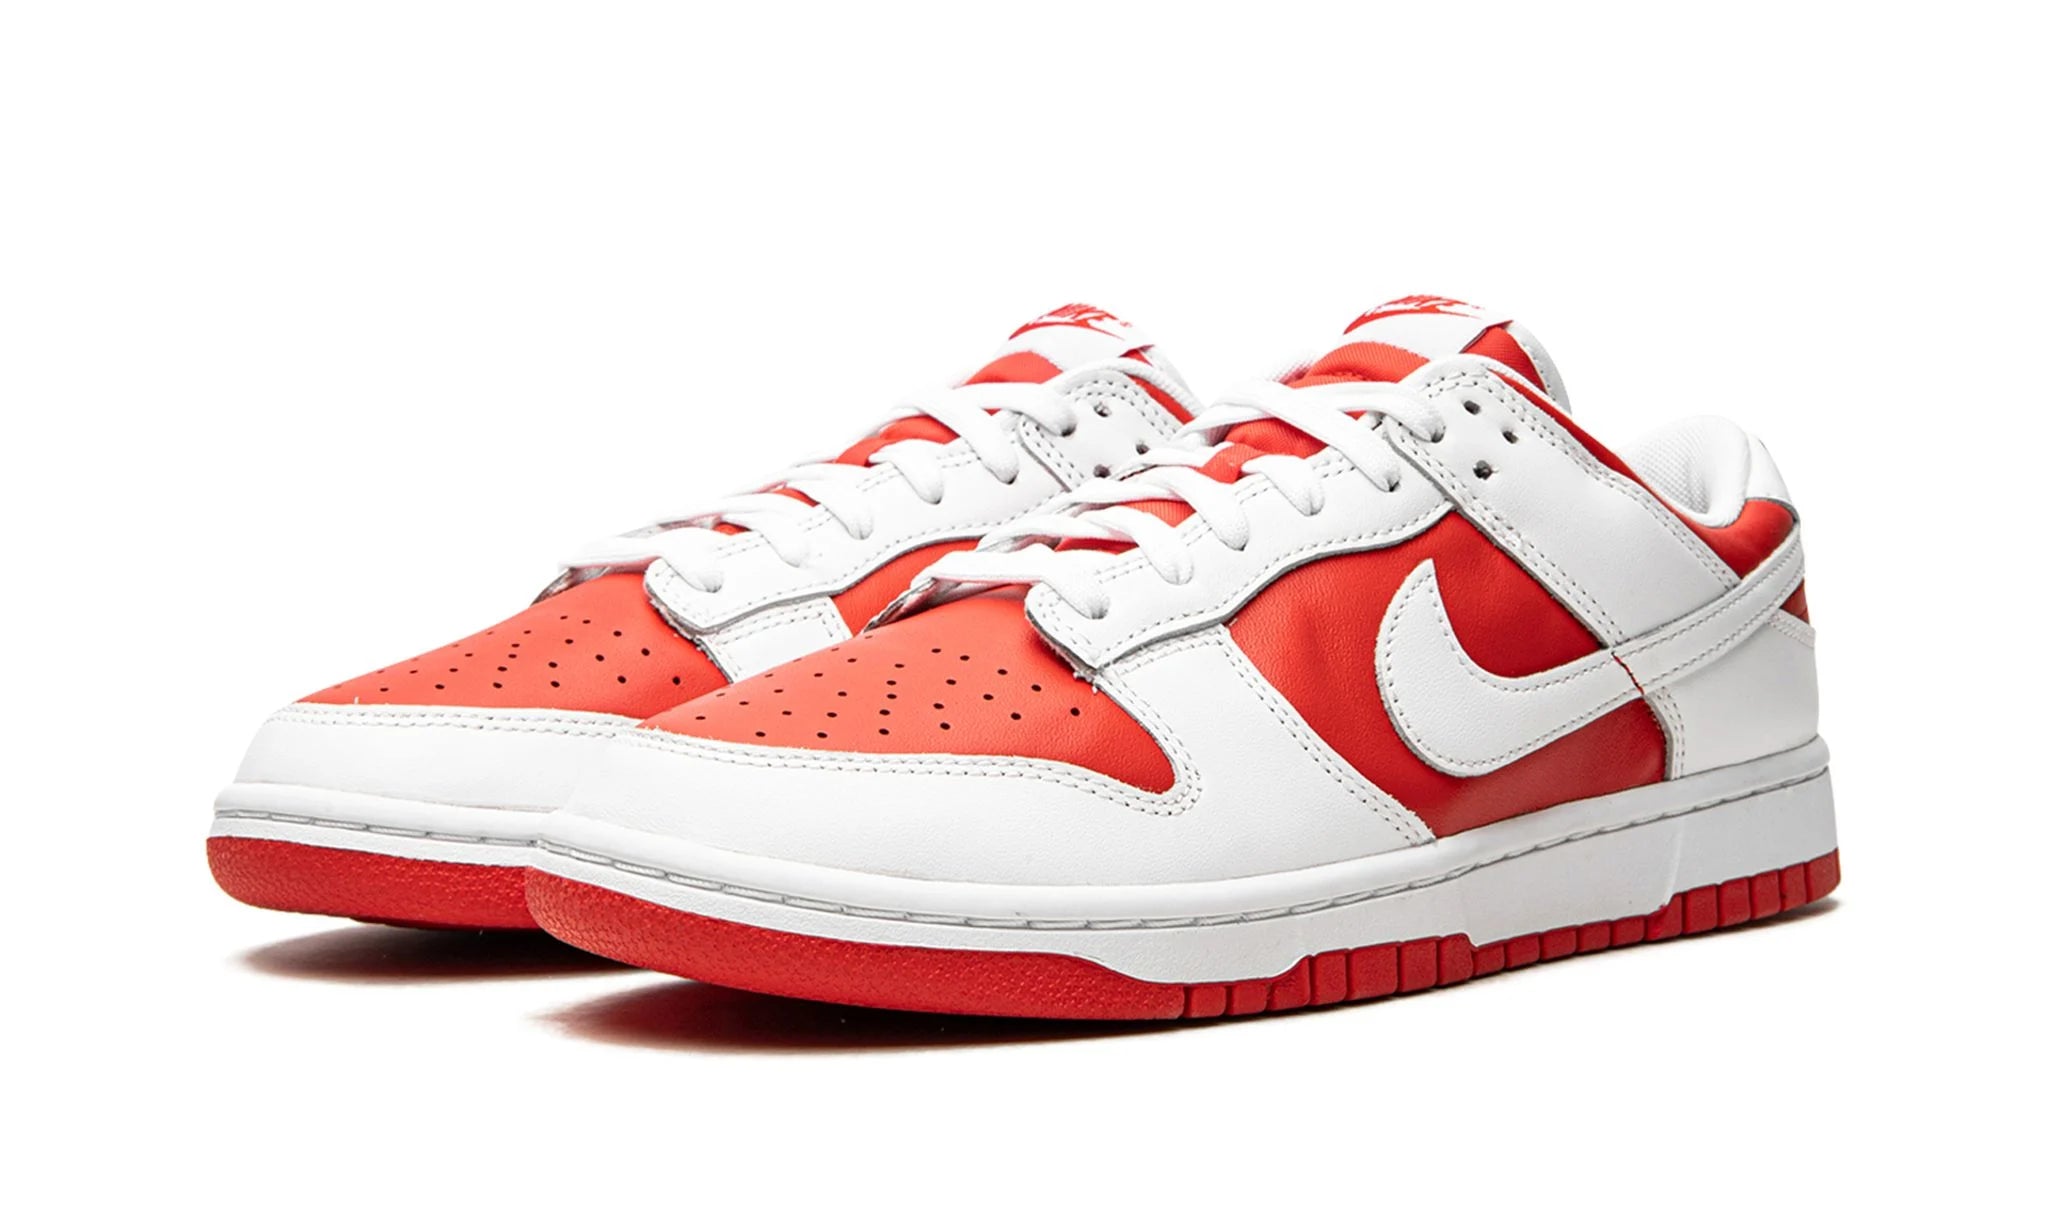 DUNK LOW "University Red 2021"